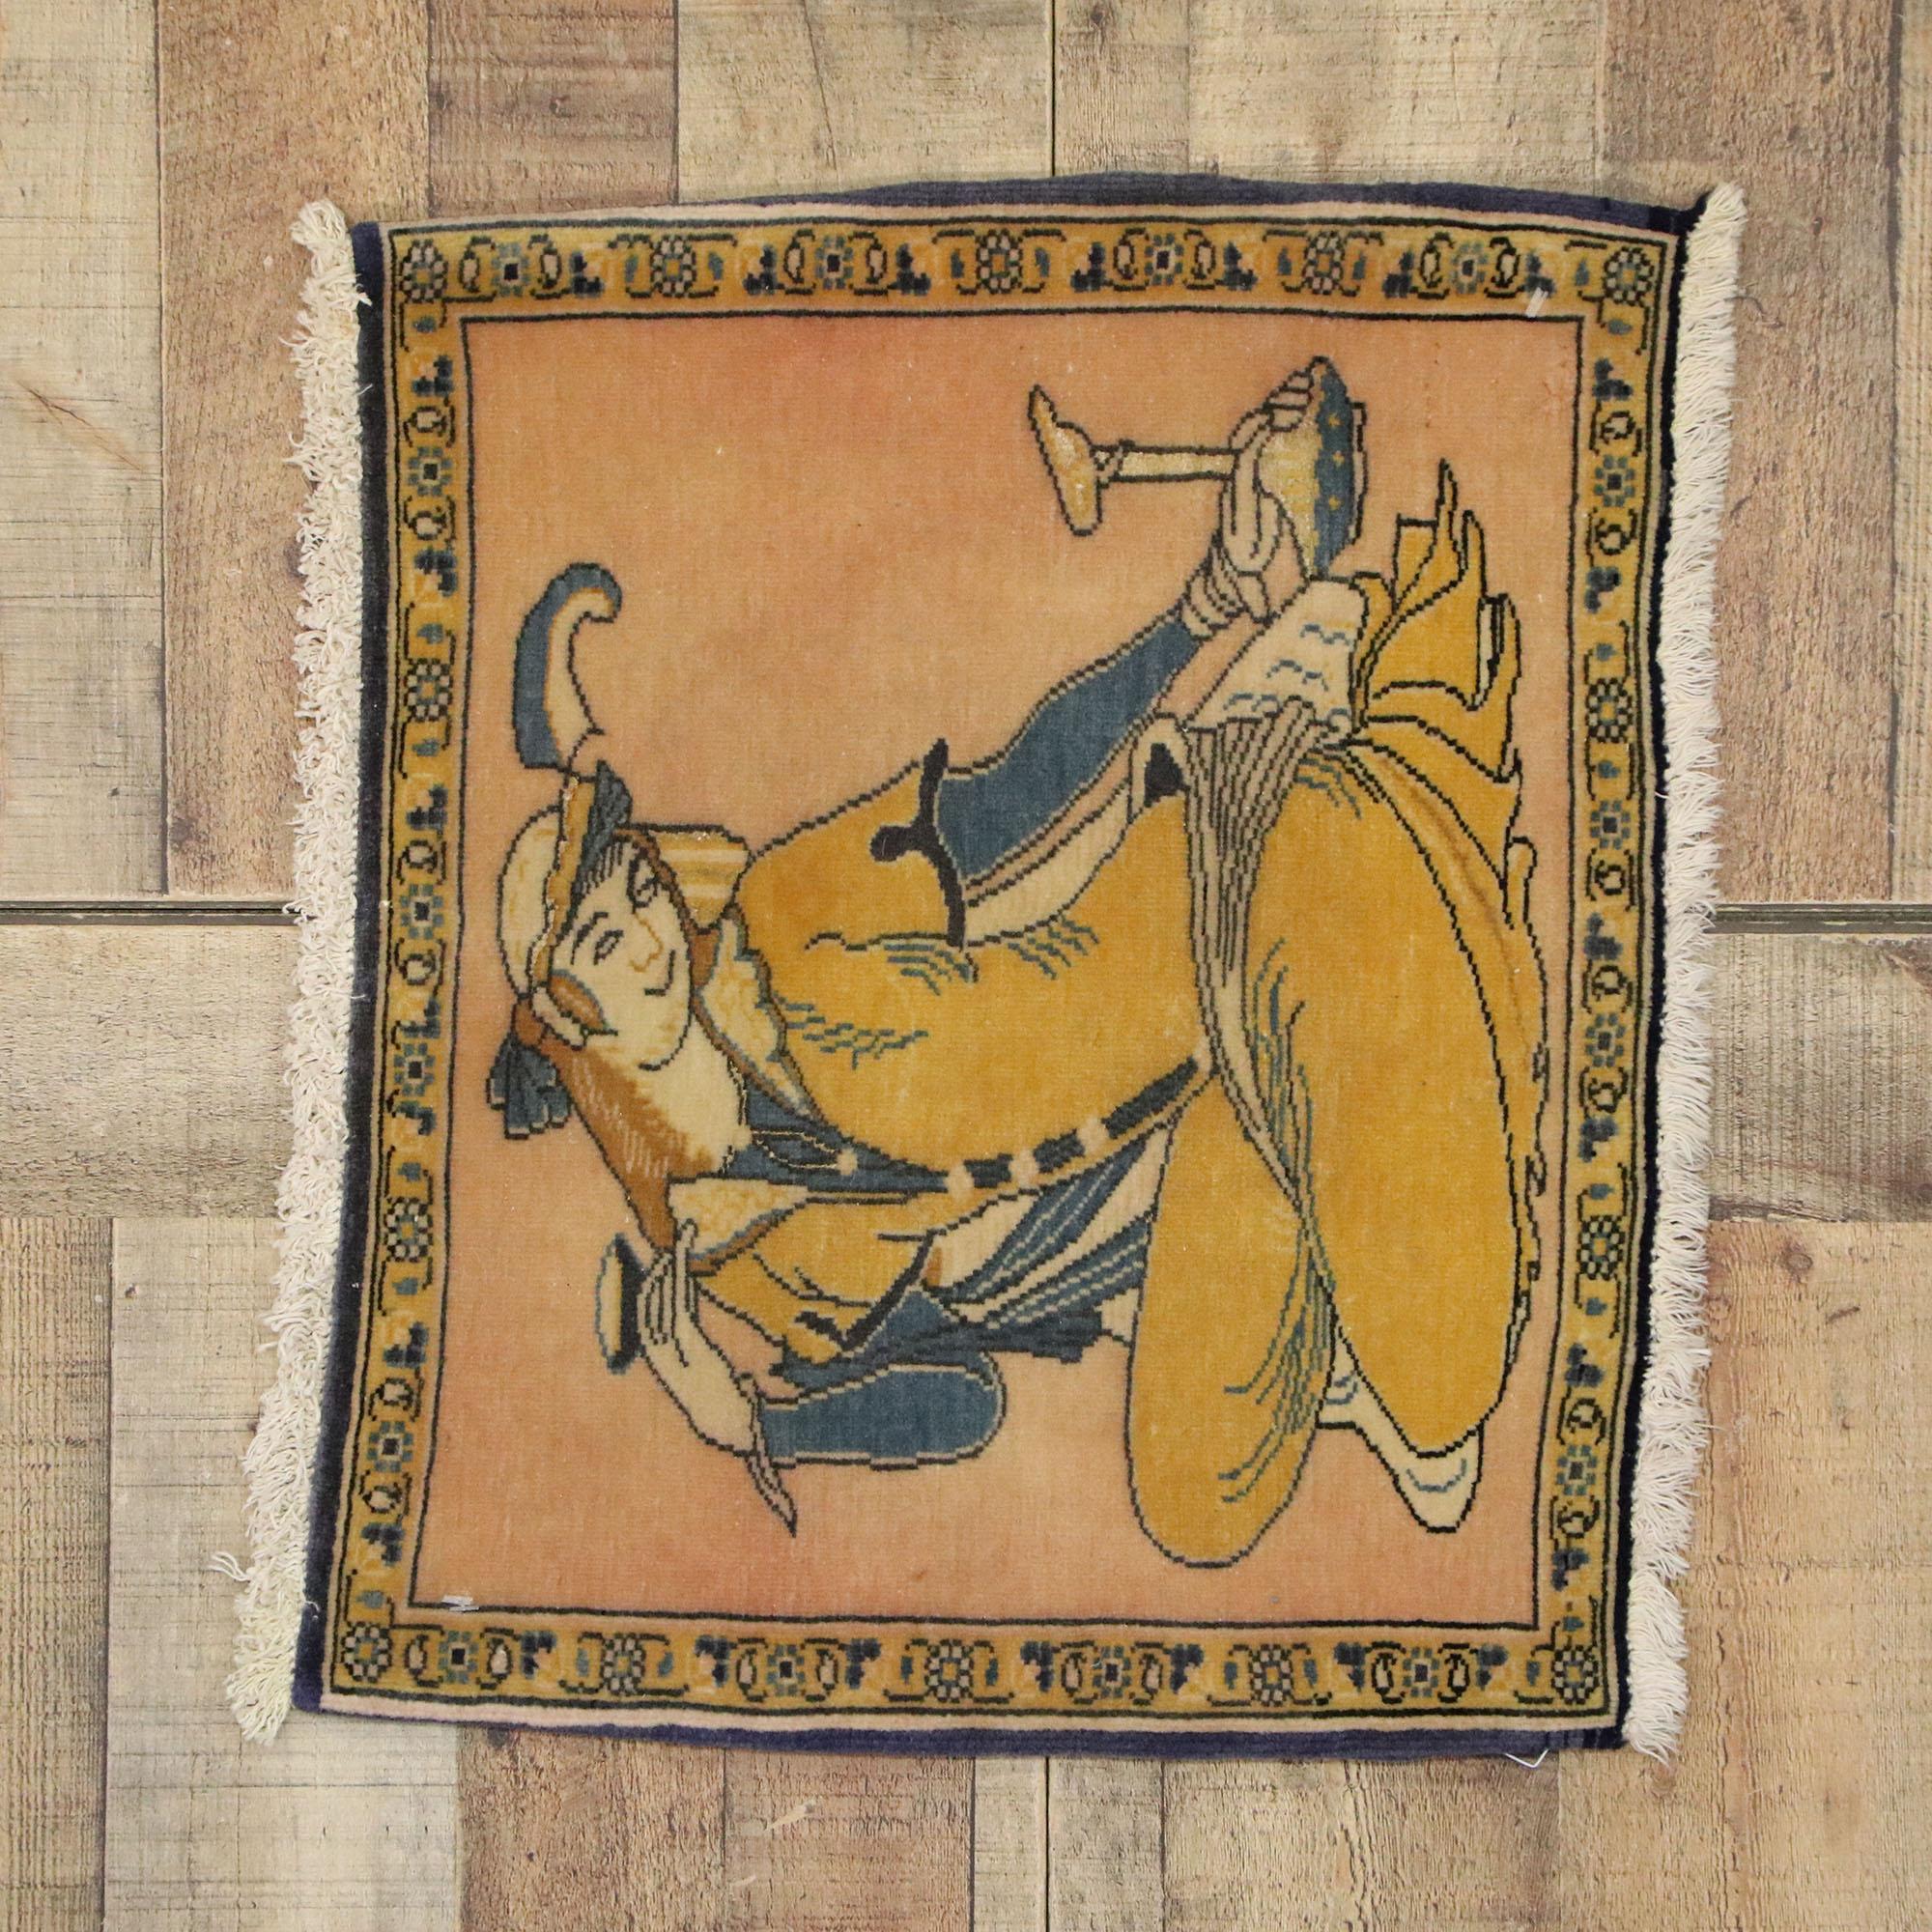 Vintage Persian Khamseh Pictorial Rug with Dervish Scene, Persian Wall Hanging In Good Condition For Sale In Dallas, TX